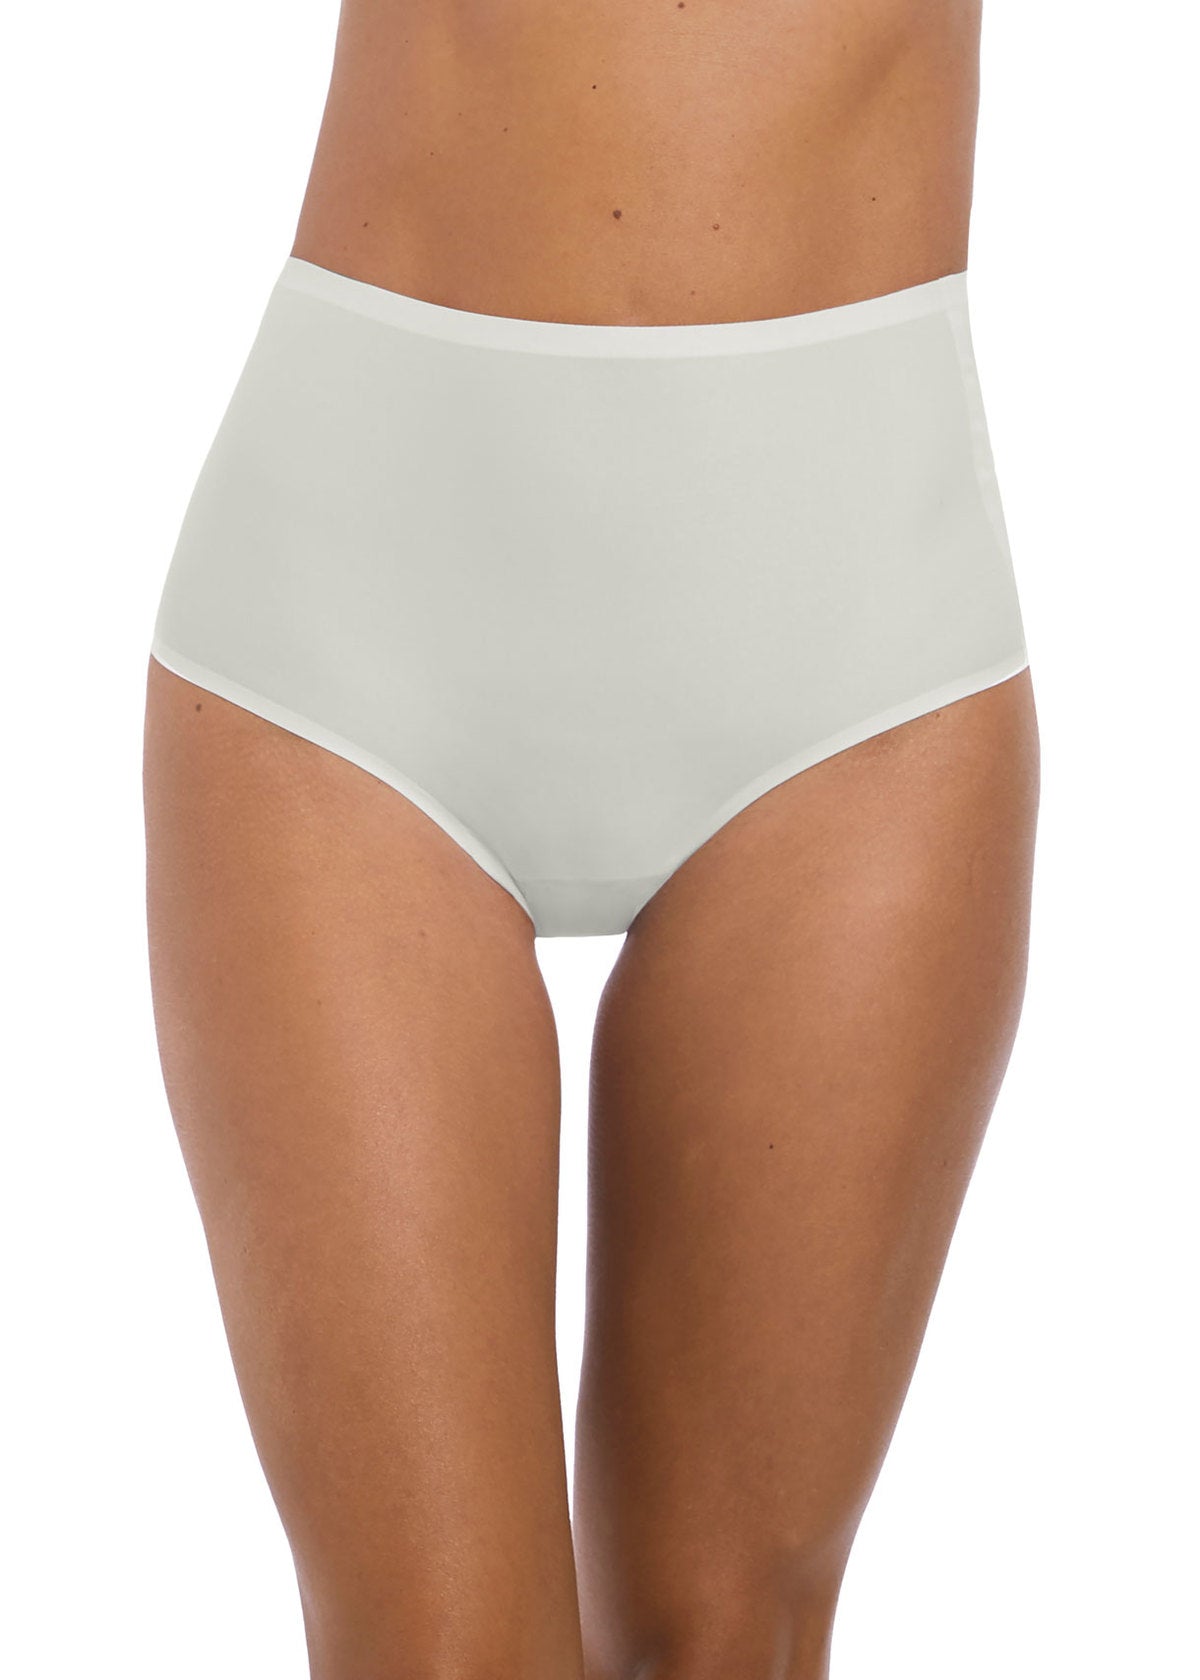 Fantasie Smoothease Invisible Stretch Full Brief - Ivory 1 Shaws Department Stores